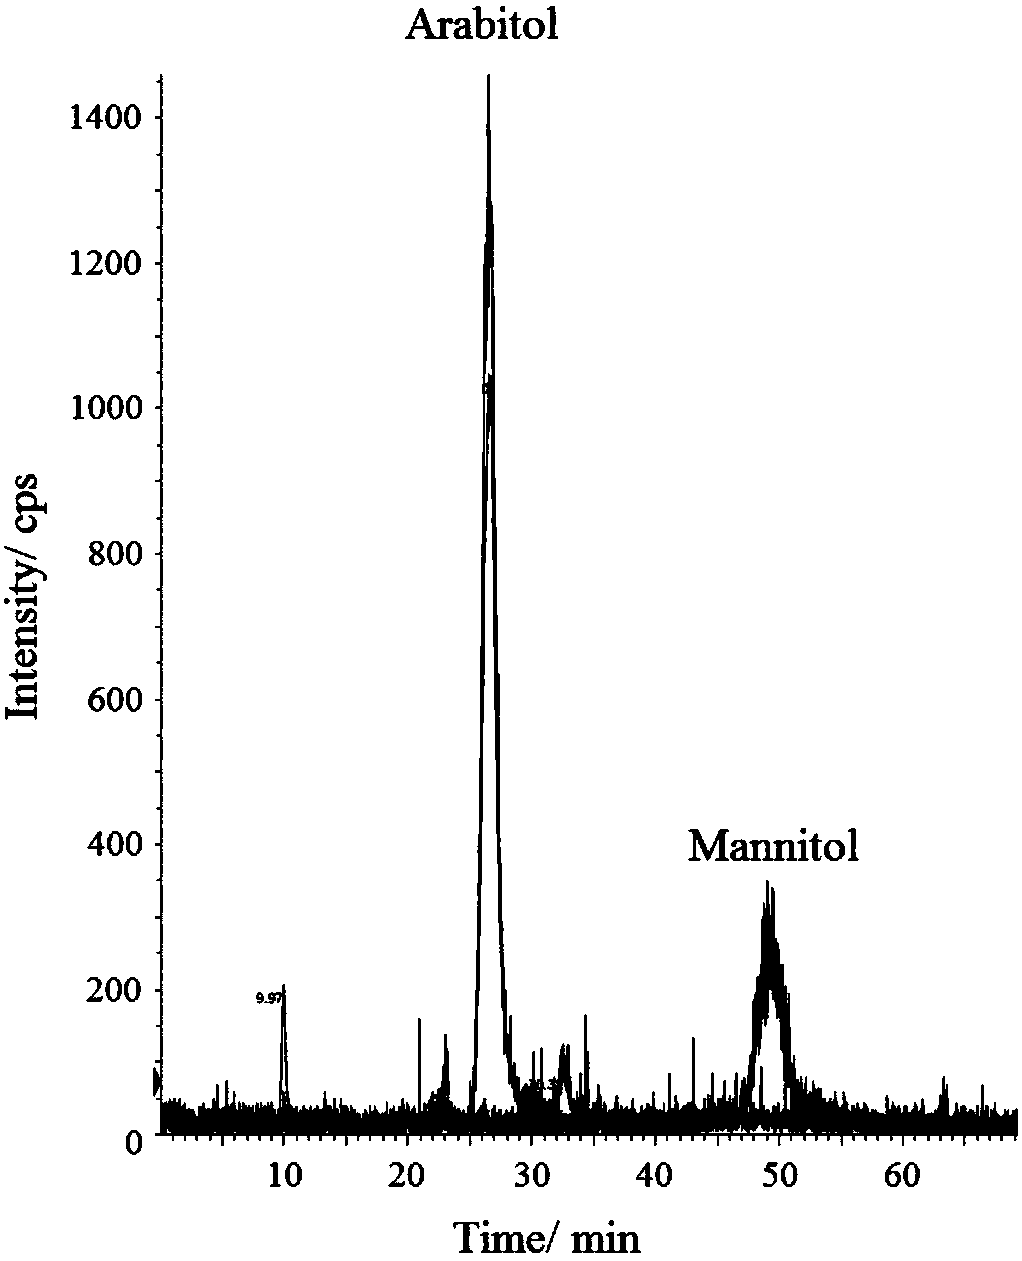 Method for rapidly determining arabitol and mannitol in aerosol